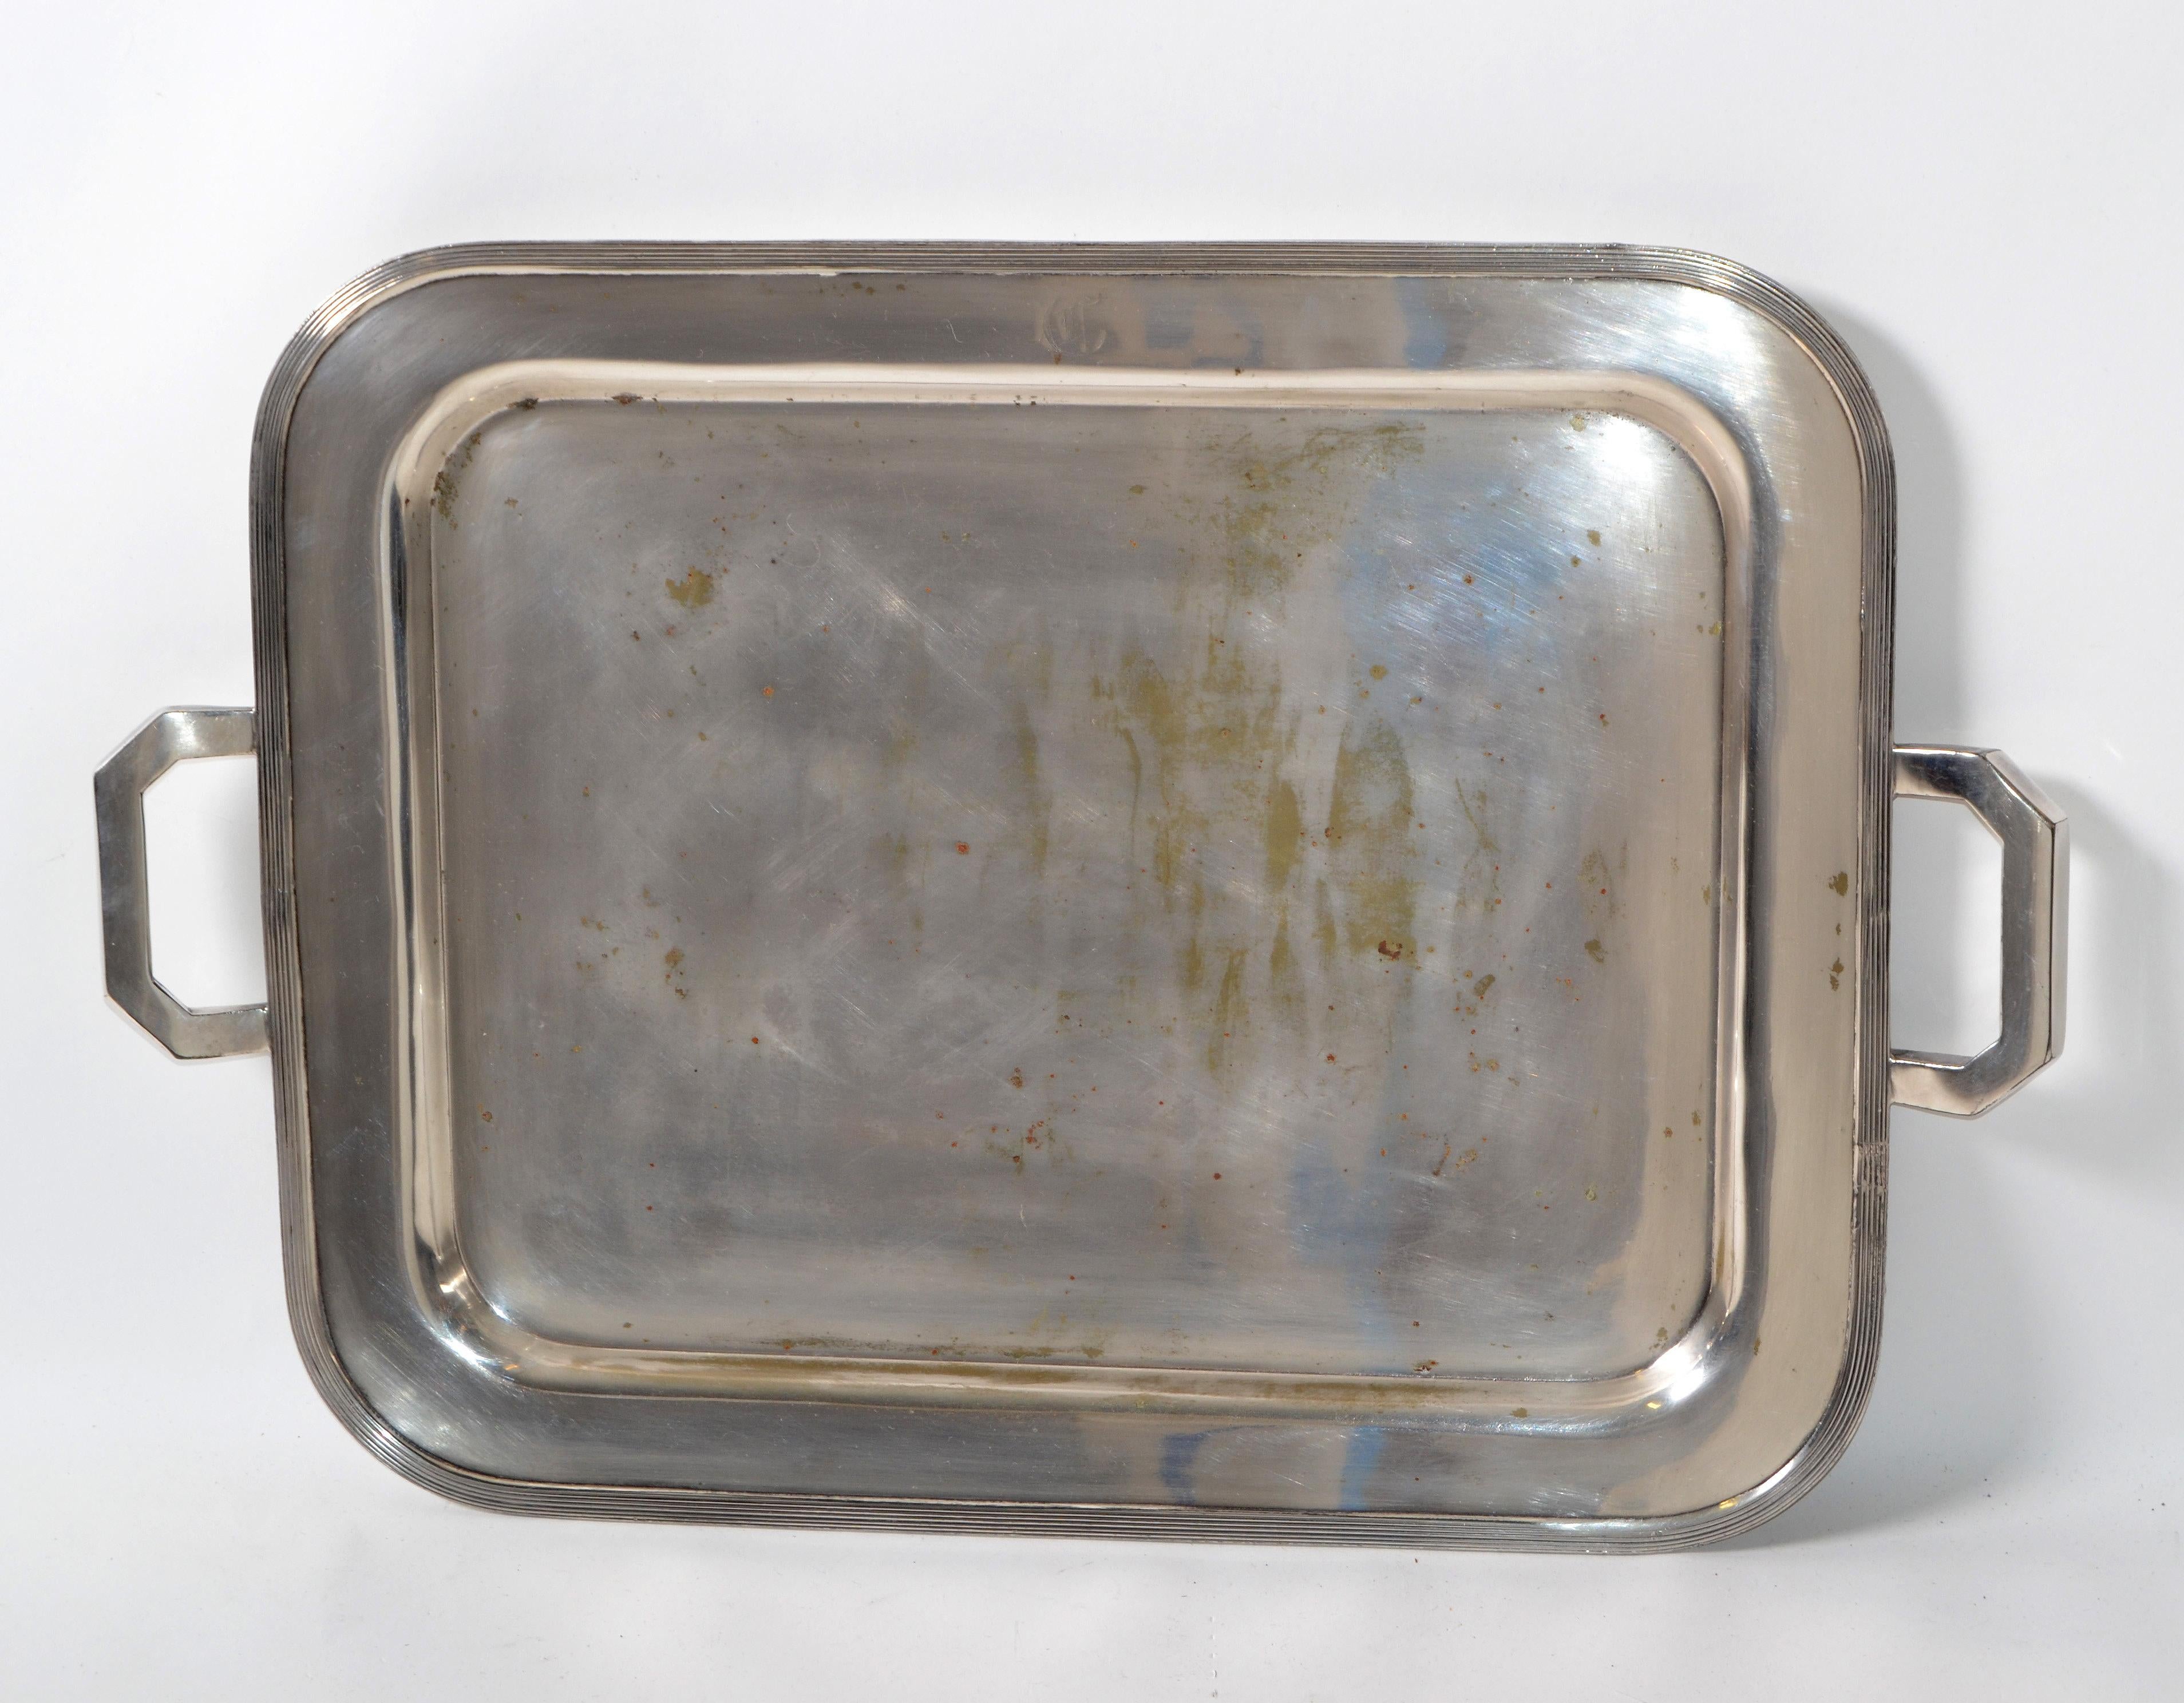 Old English Silver Plate over Nickel Ornate Rectangular Serving Tray Handles In Fair Condition For Sale In Miami, FL